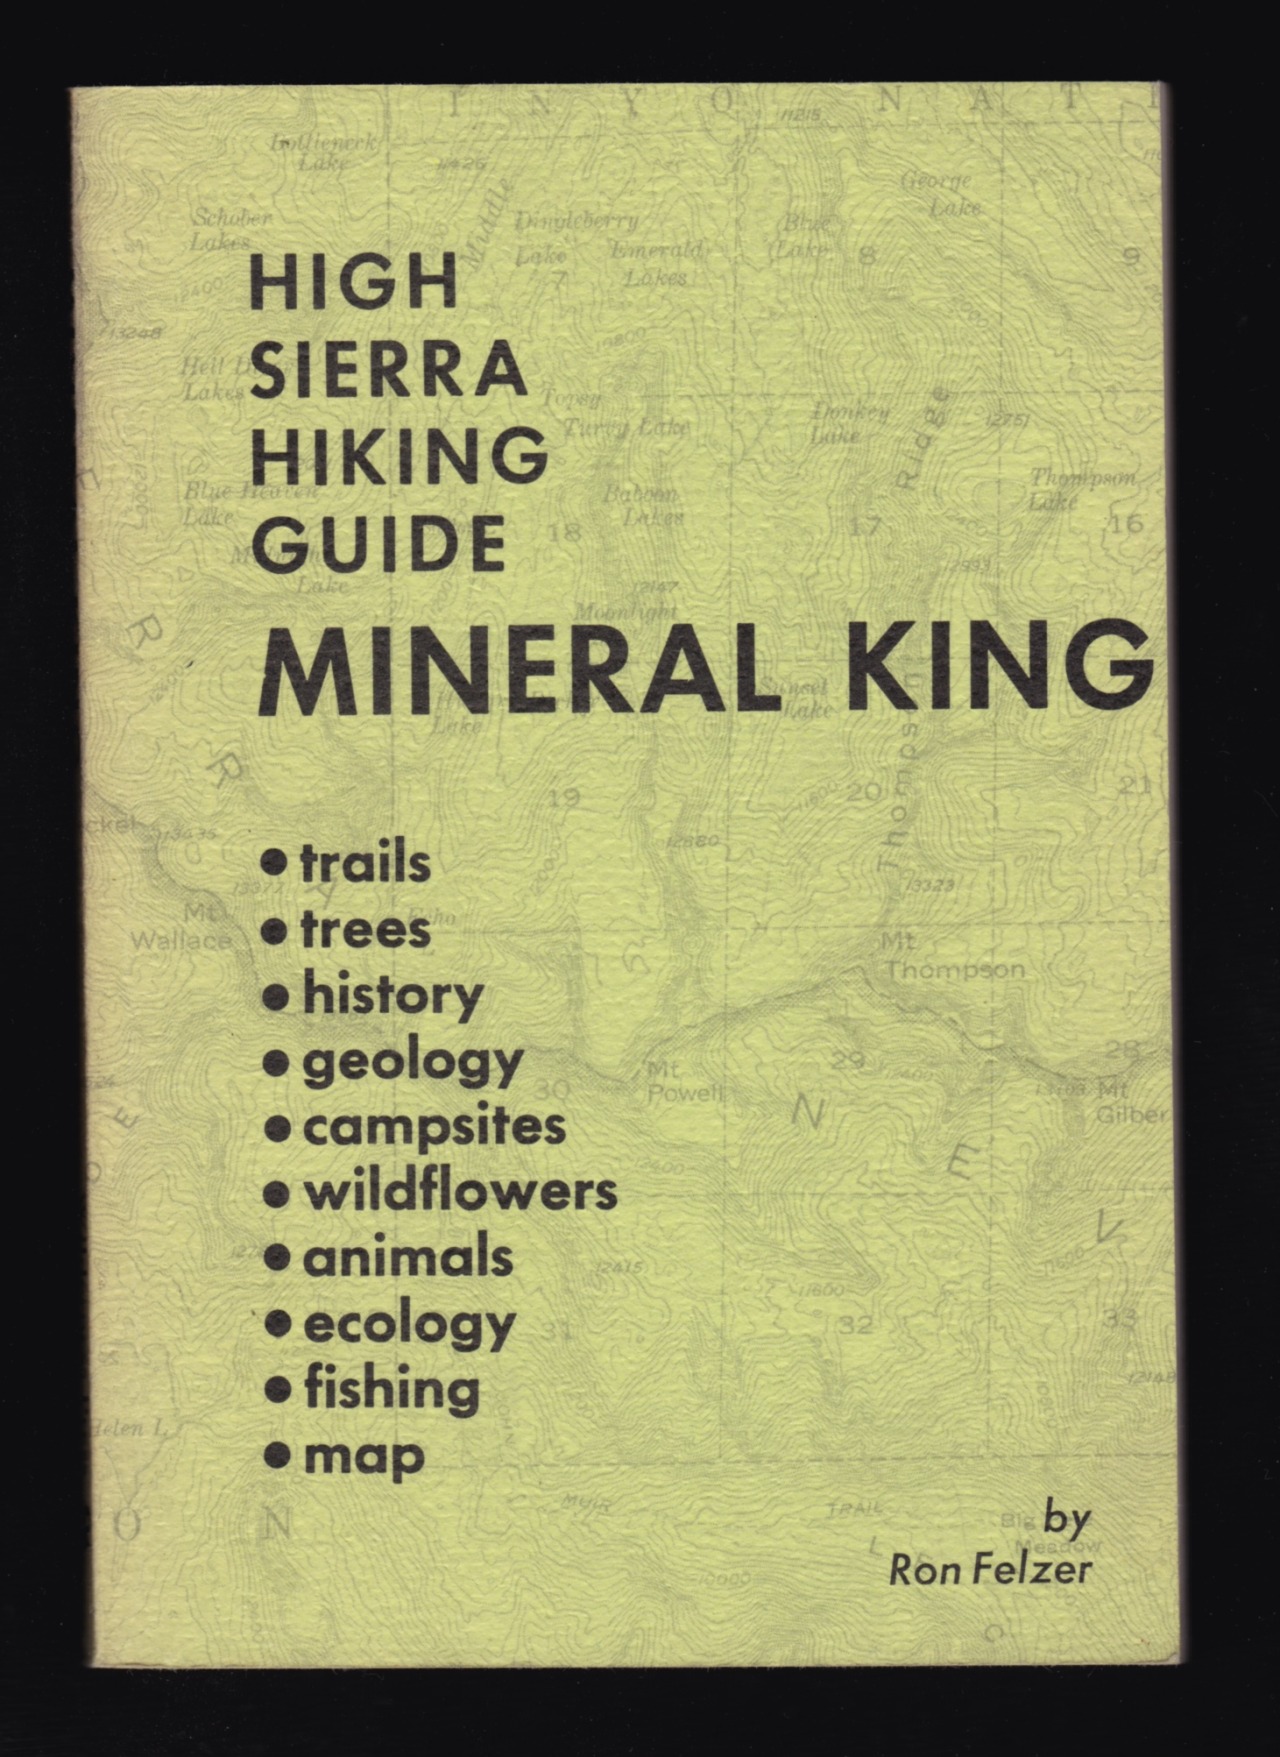 Book Collection, ID: B2014-027
Title: High Sierra Hiking Guide; Mineral King
Author: Felzer, Ron
Dates: 1971; 1972
Walking: refreshing for the body as well as the soul; he walks or he gets nowhere
Suits_(Legal): Being considered by Supreme Court (as...